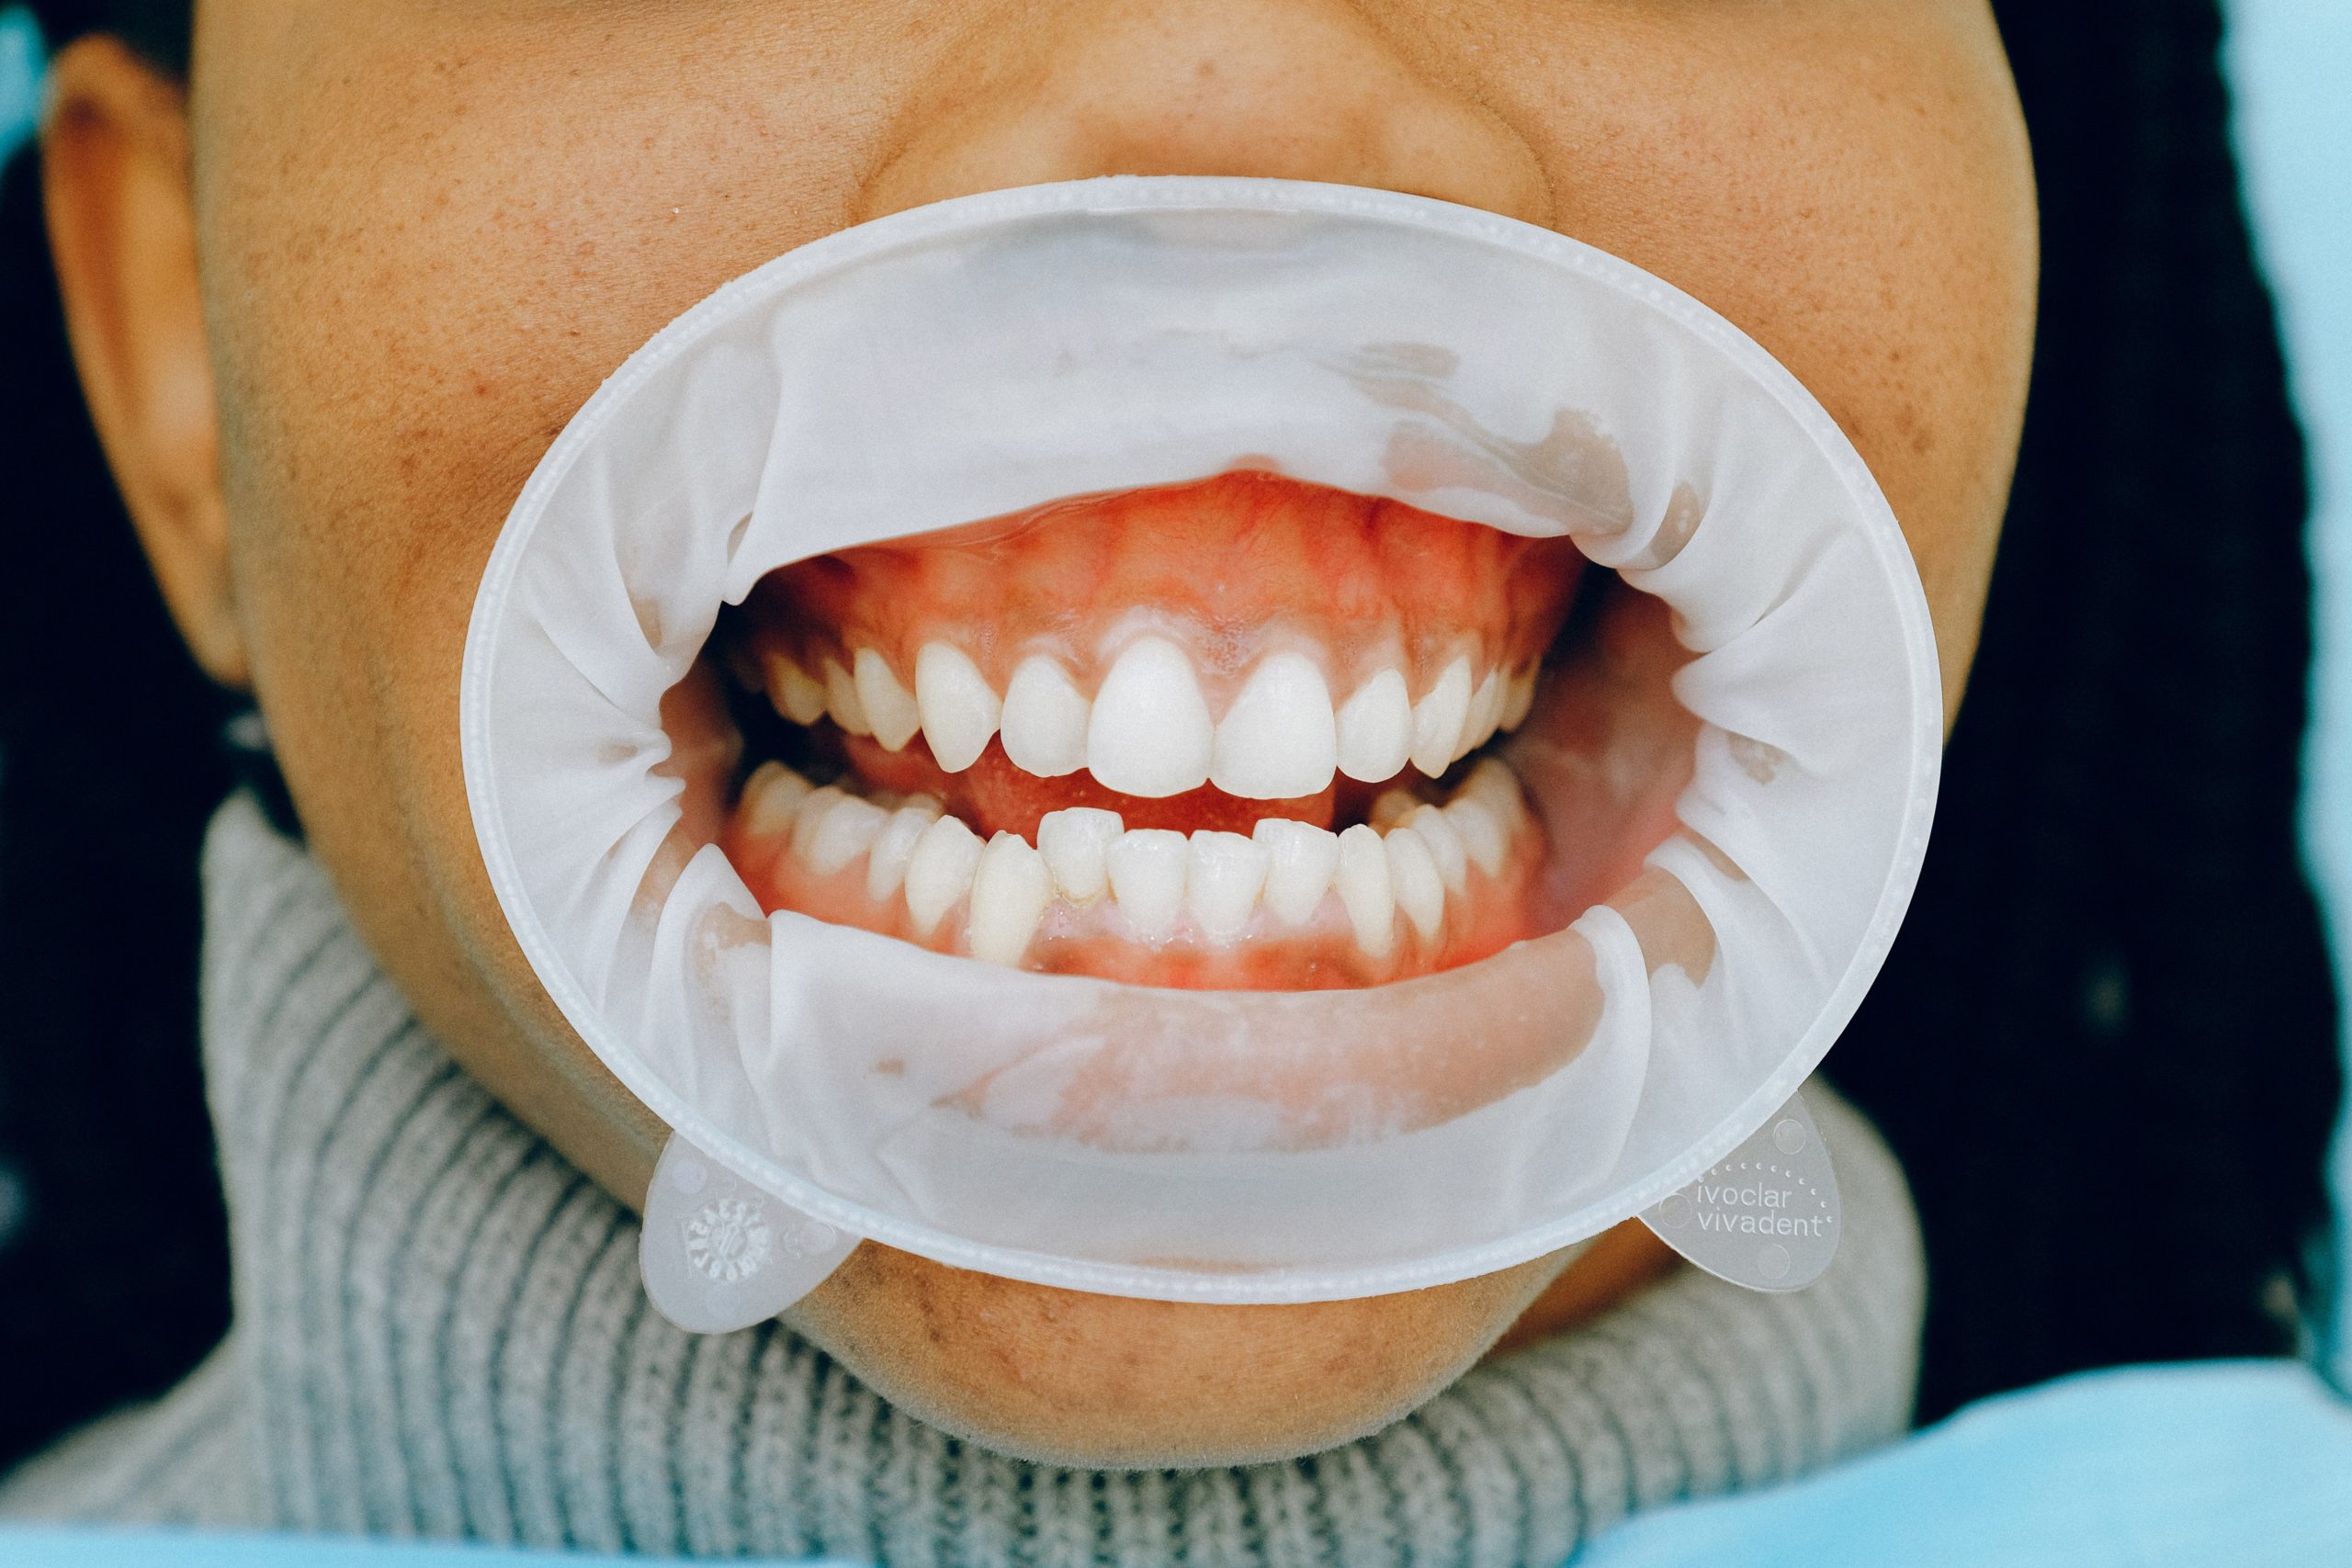 A photo of a patient wearing the dental lip device preparing to have her teeth and gums cleaned.